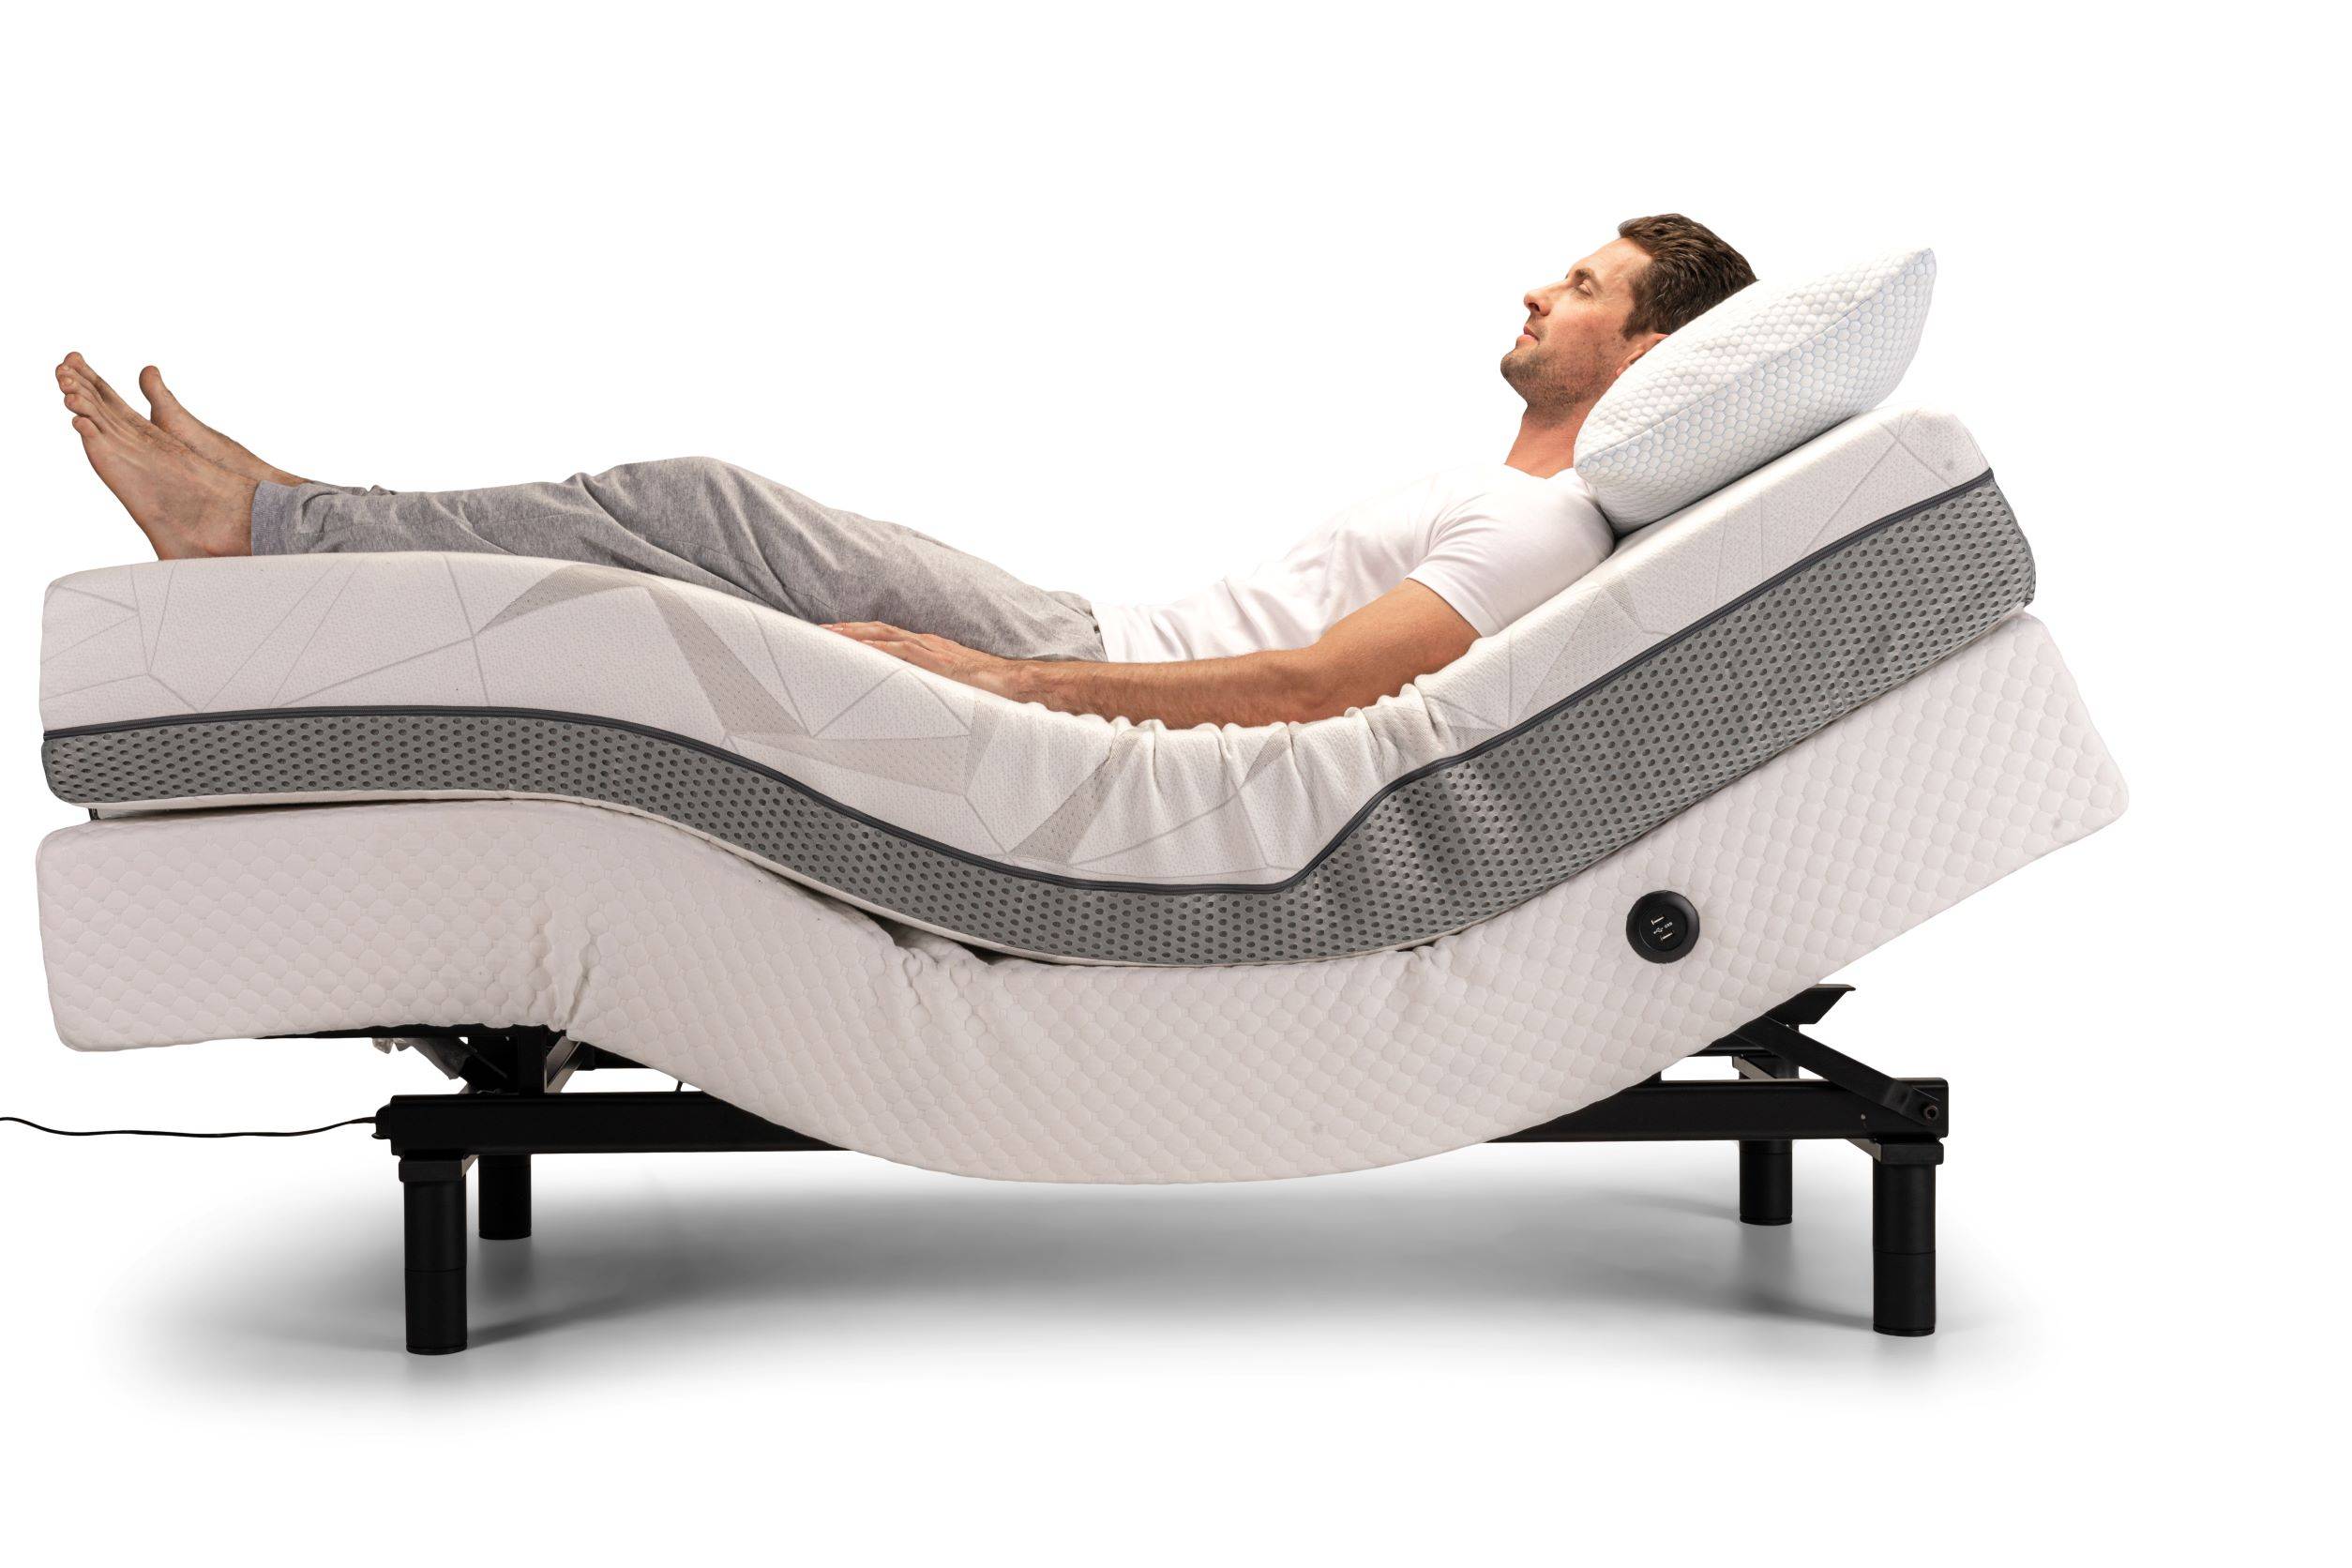 Therapeutic adjustable bed